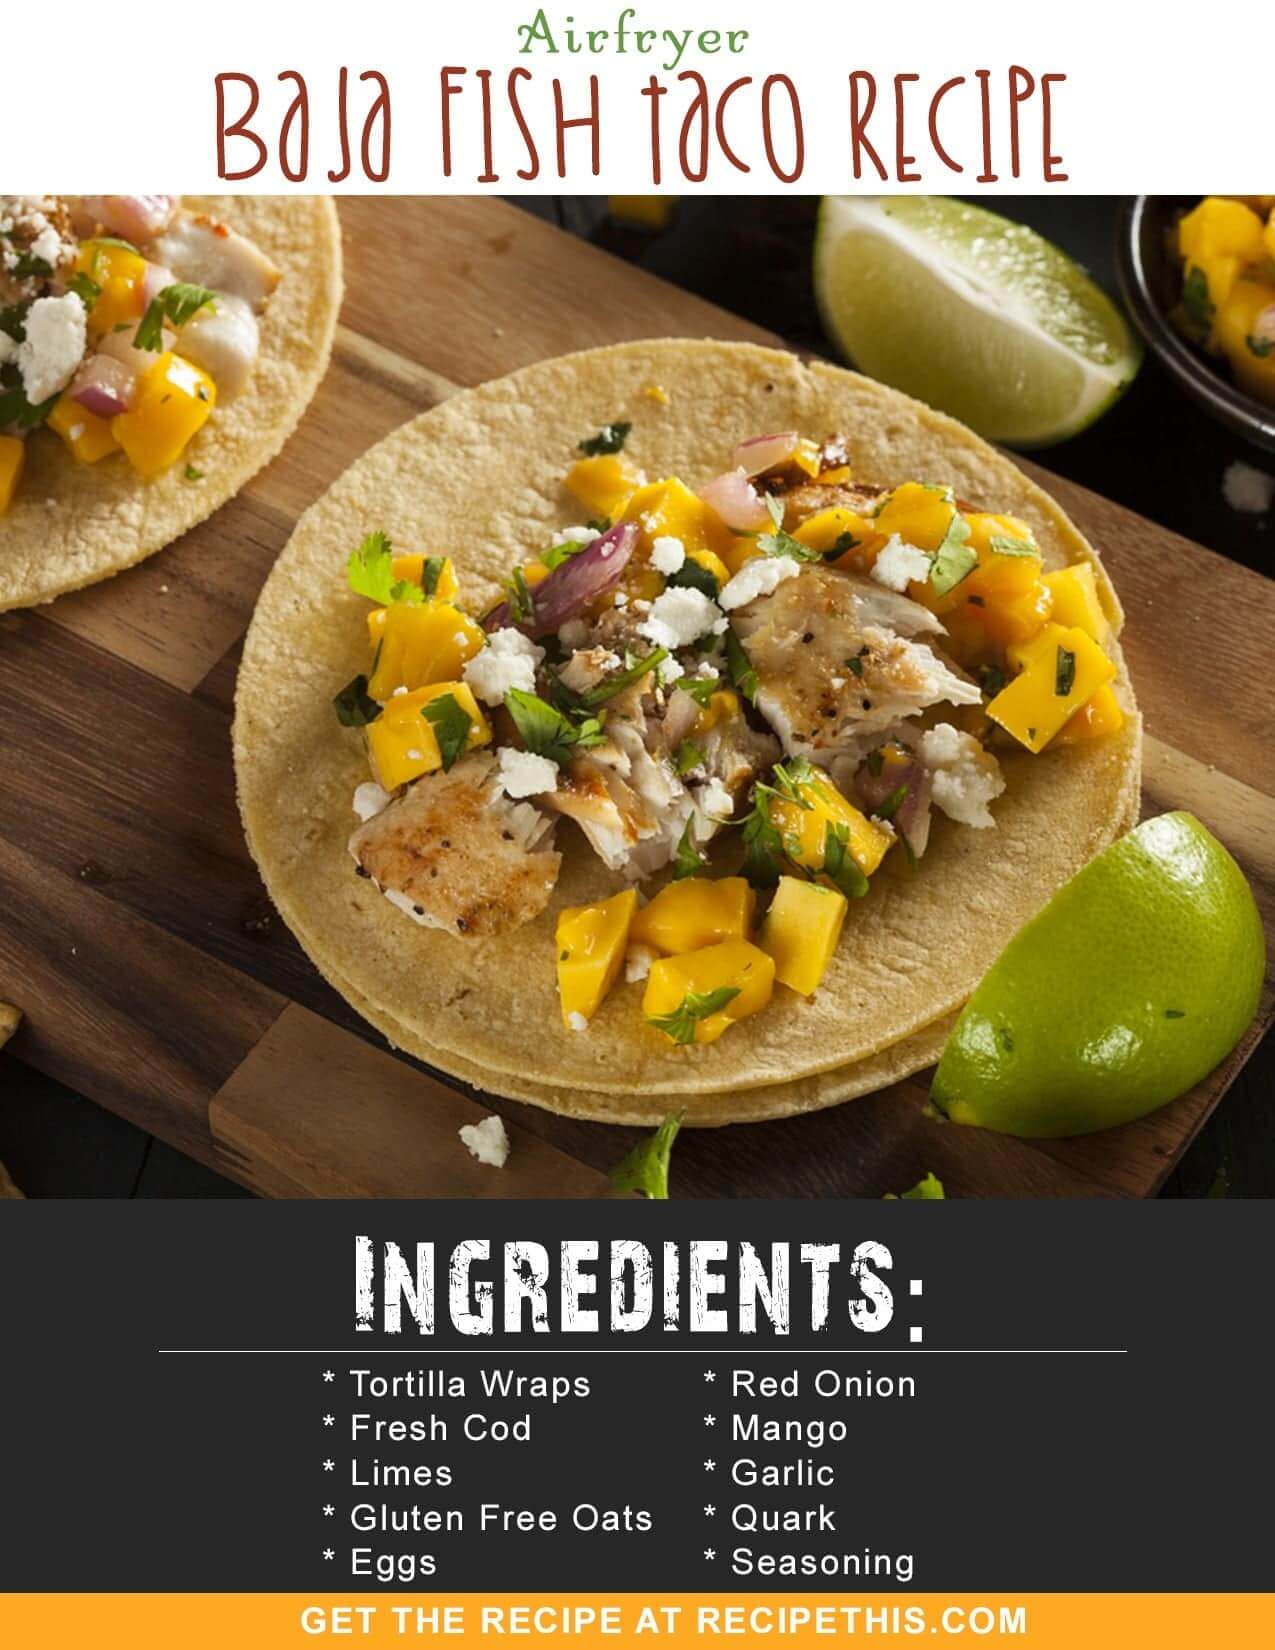 Airfryer Recipes | Airfryer Baja Fish Taco Recipe from RecipeThis.com